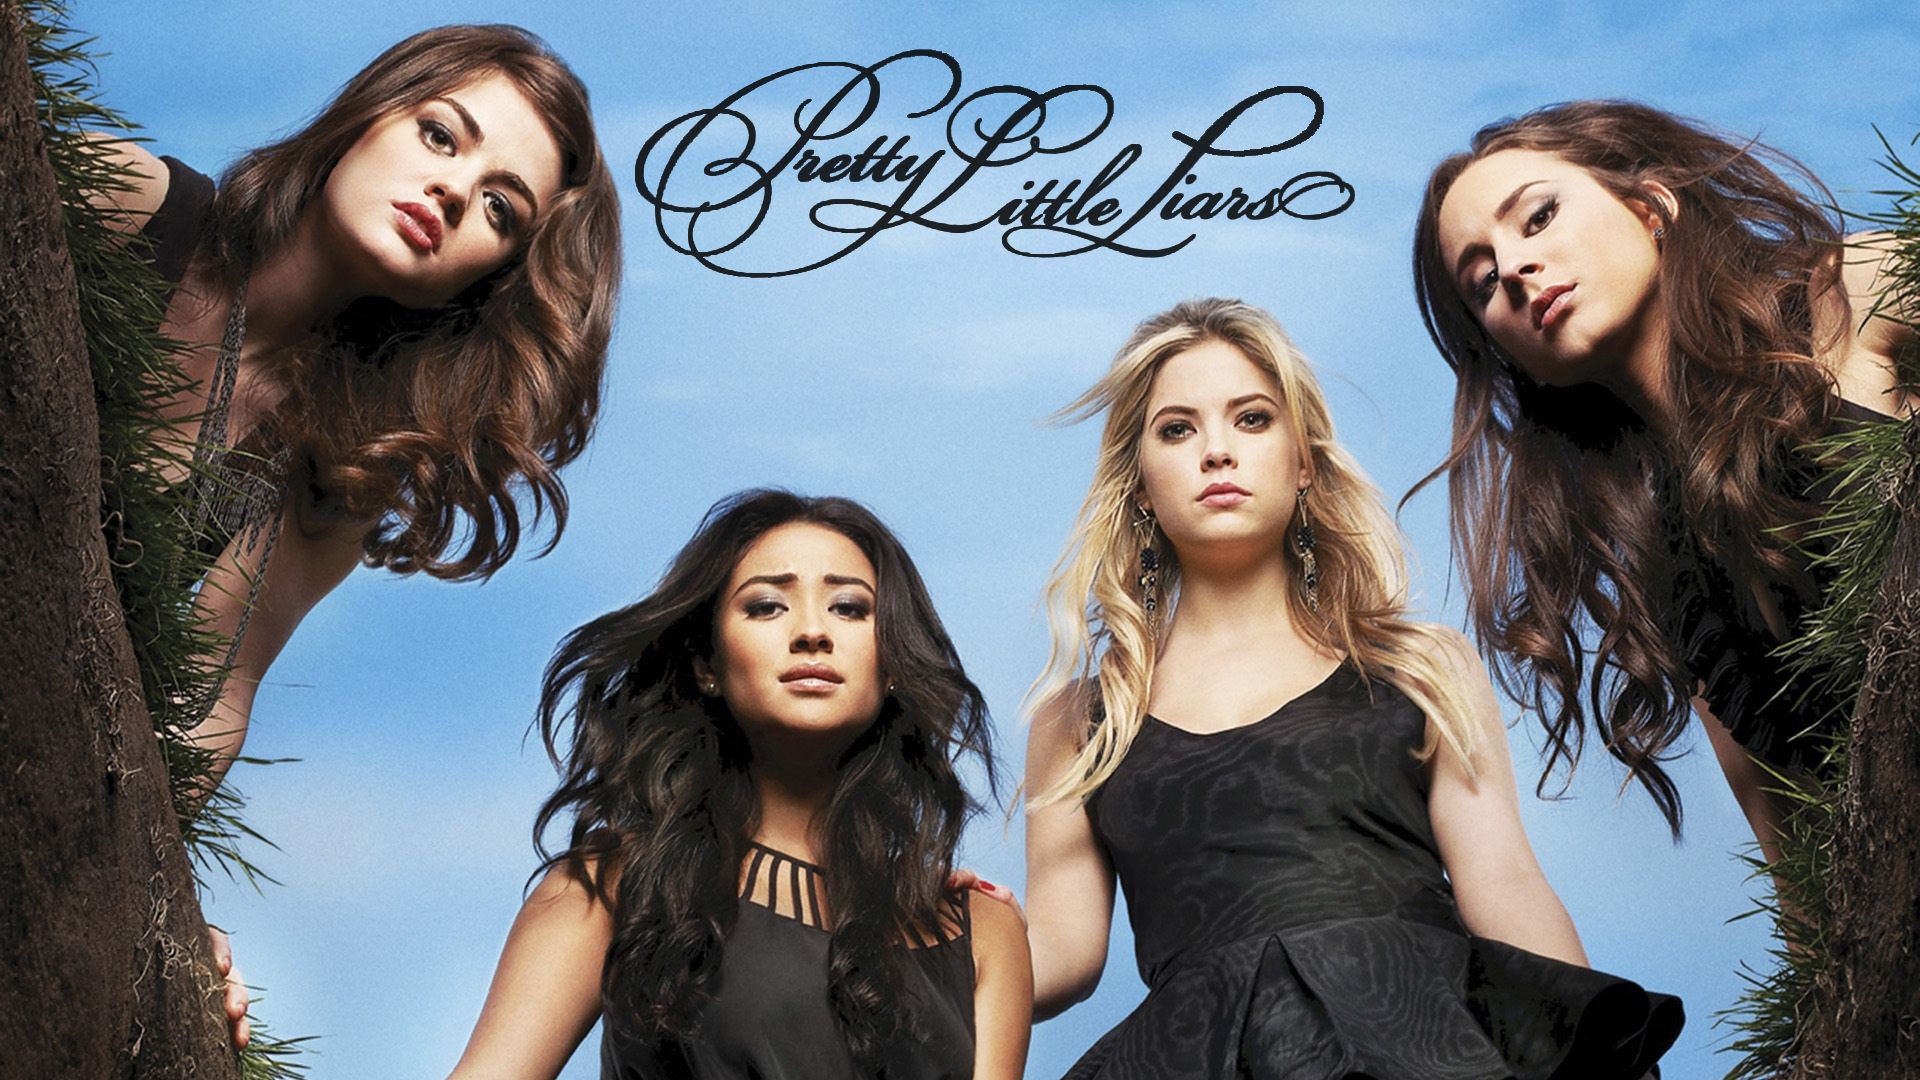 Pretty Little Liars BehindtheScenes Special Airs Next Week